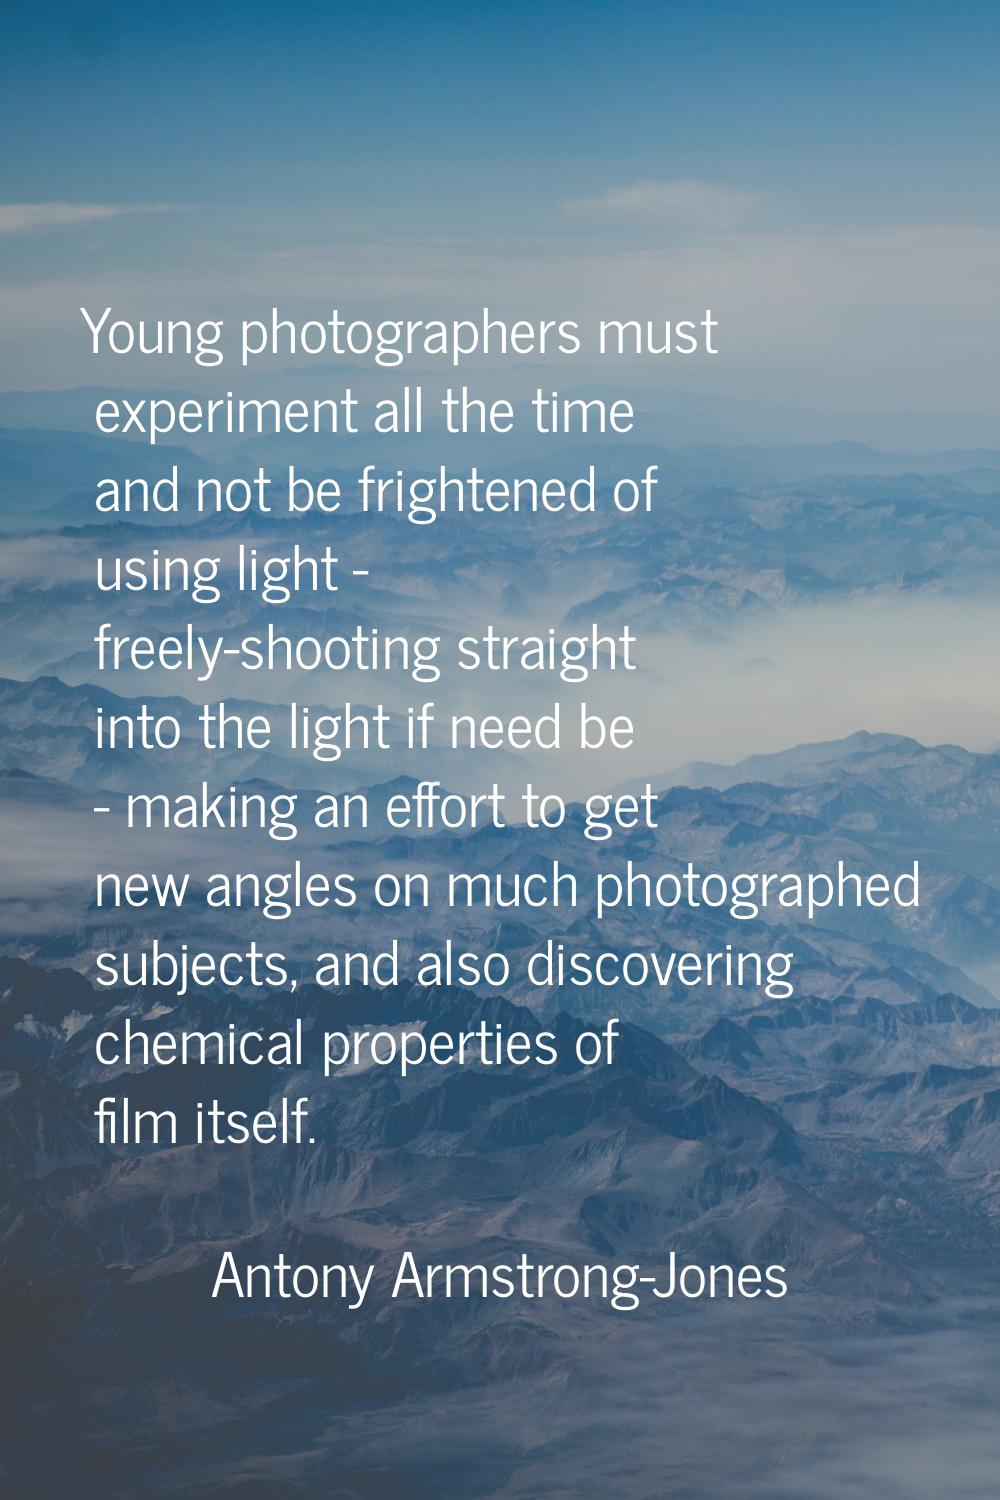 Young photographers must experiment all the time and not be frightened of using light - freely-shoo